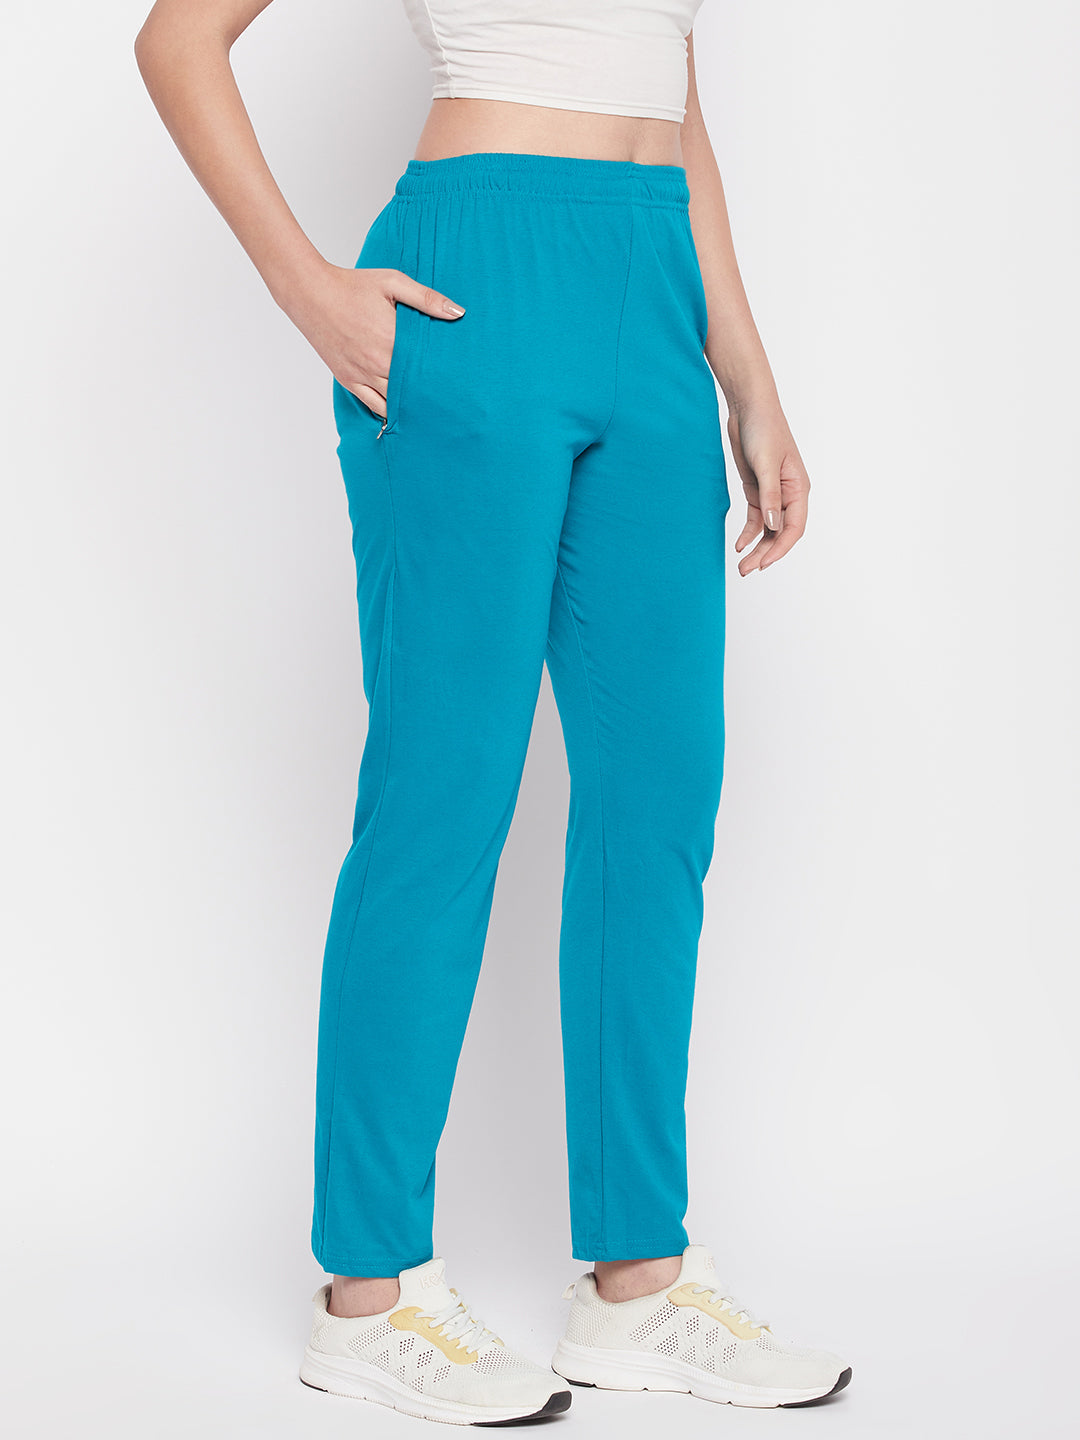 Clora Rama Green Solid Mid Rise Cotton Track Pants